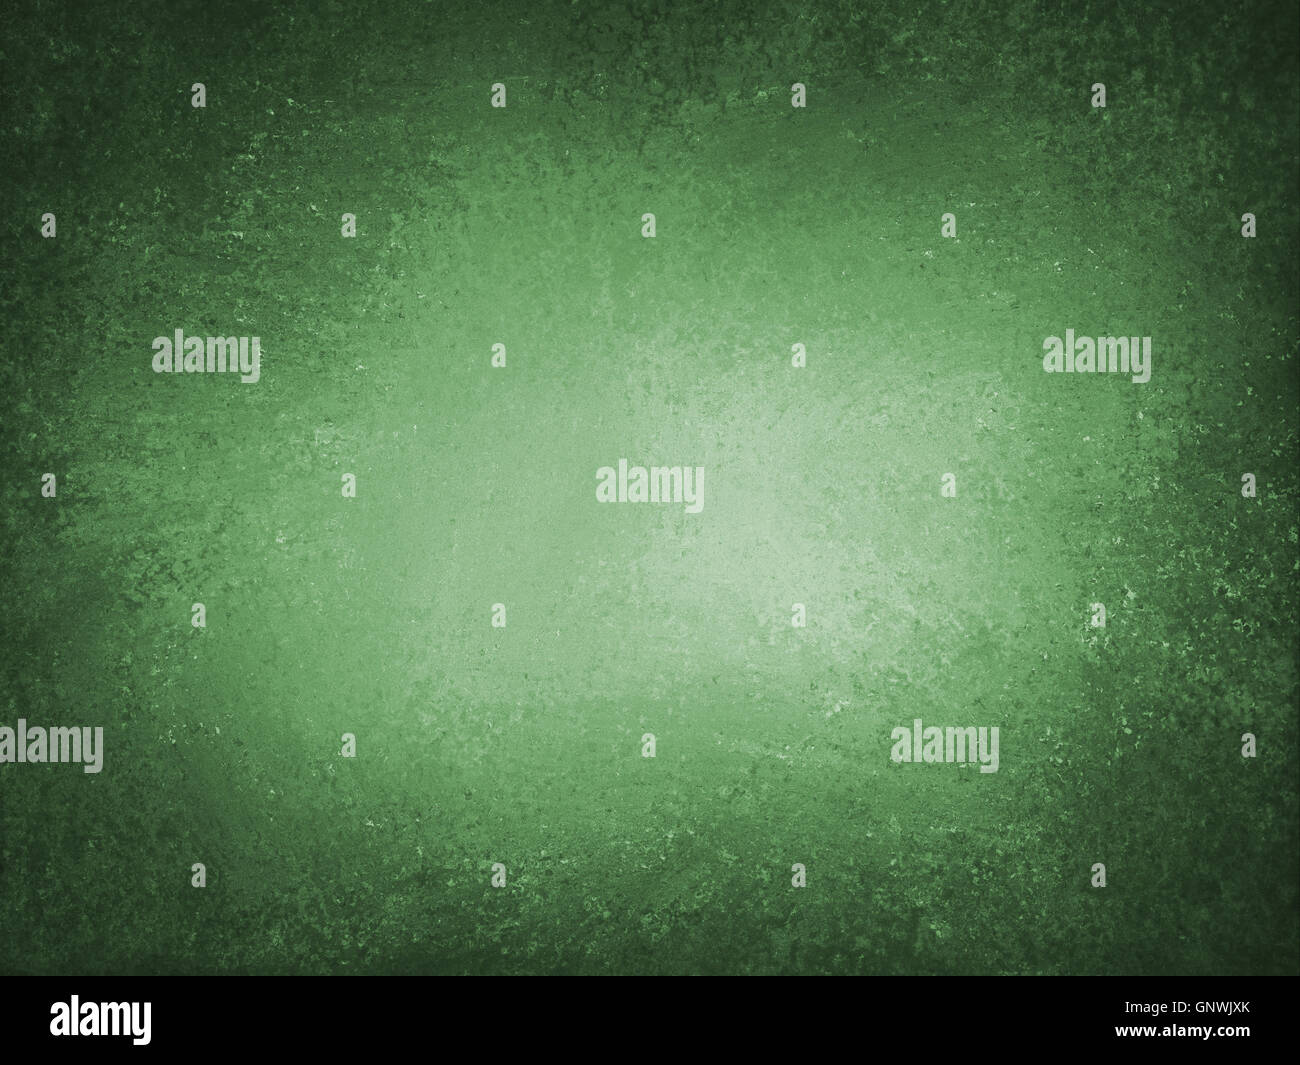 green background with black grunge border, Christmas background with vintage textured vignette Stock Photo